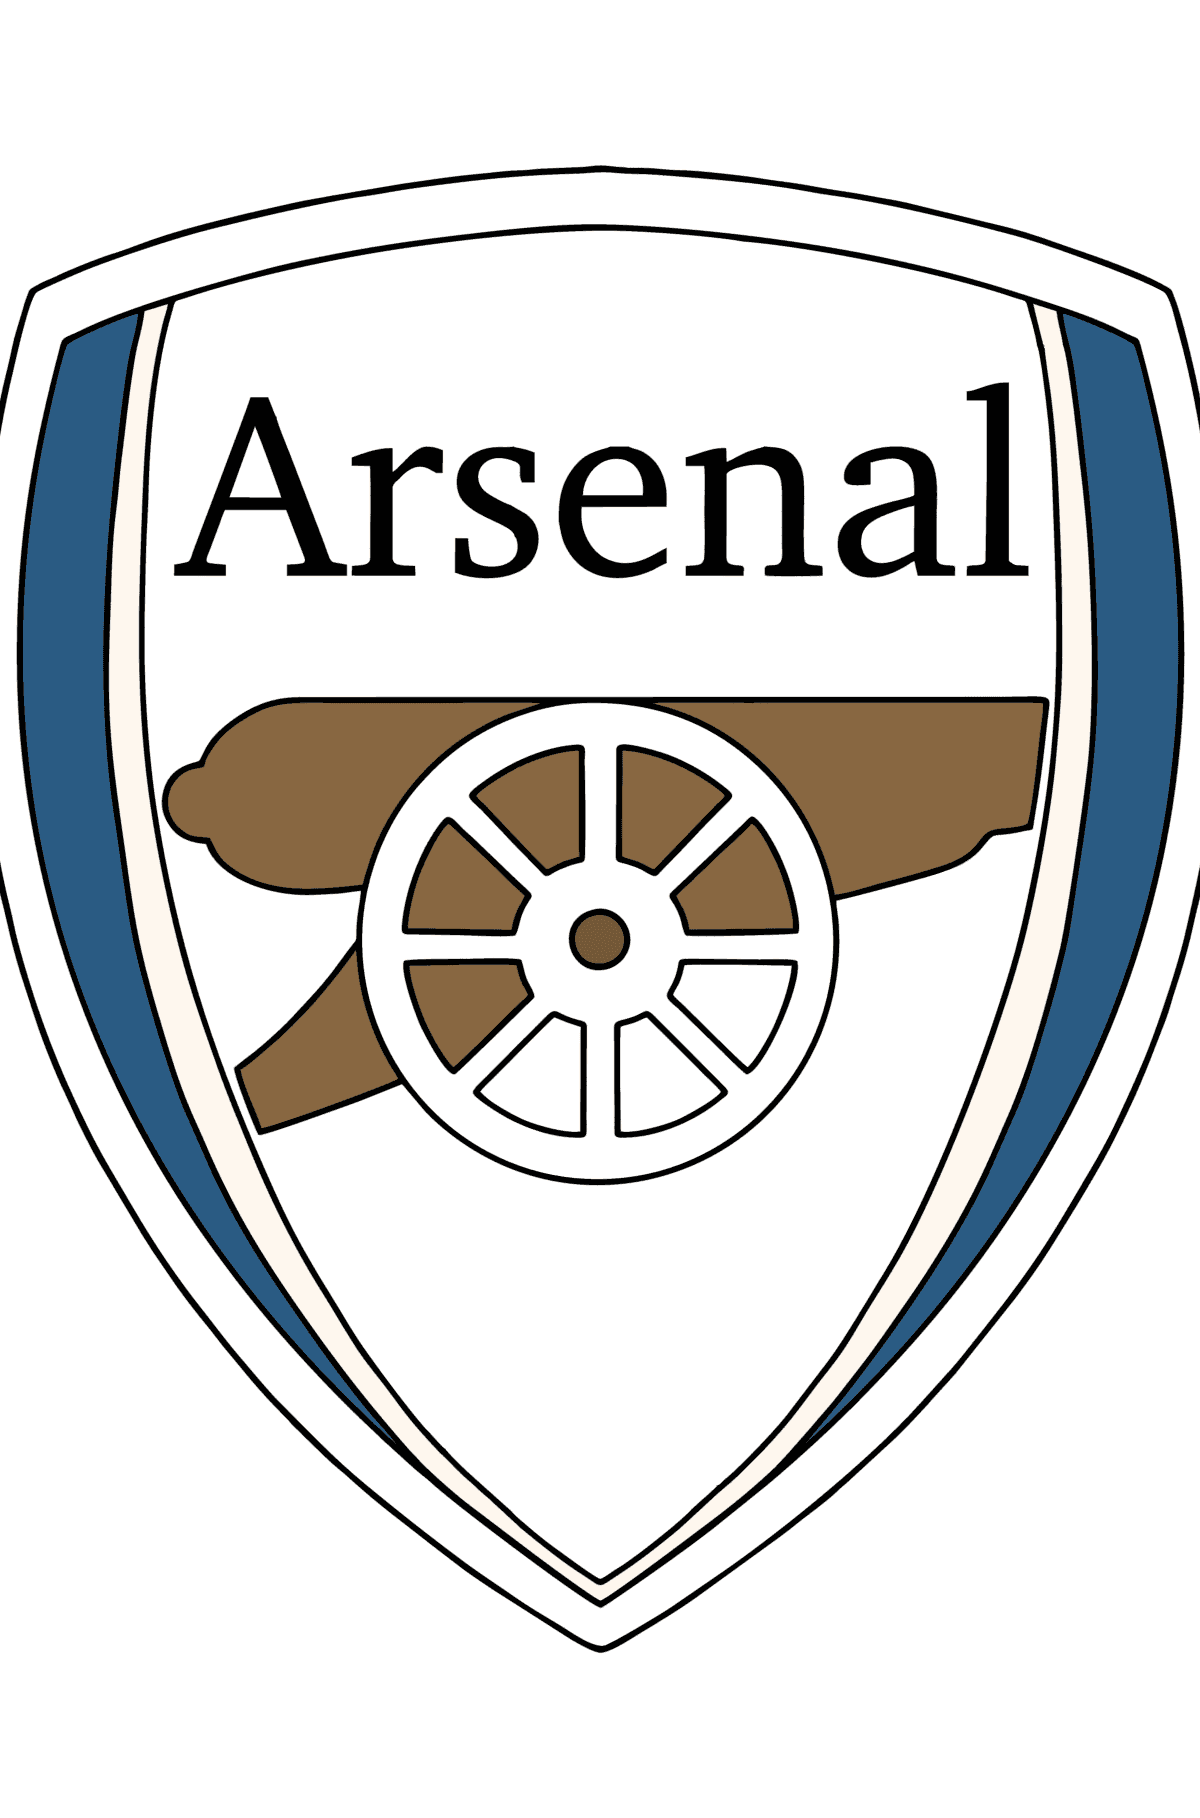 UEFA Arsenal сoloring page - Coloring Pages for Kids